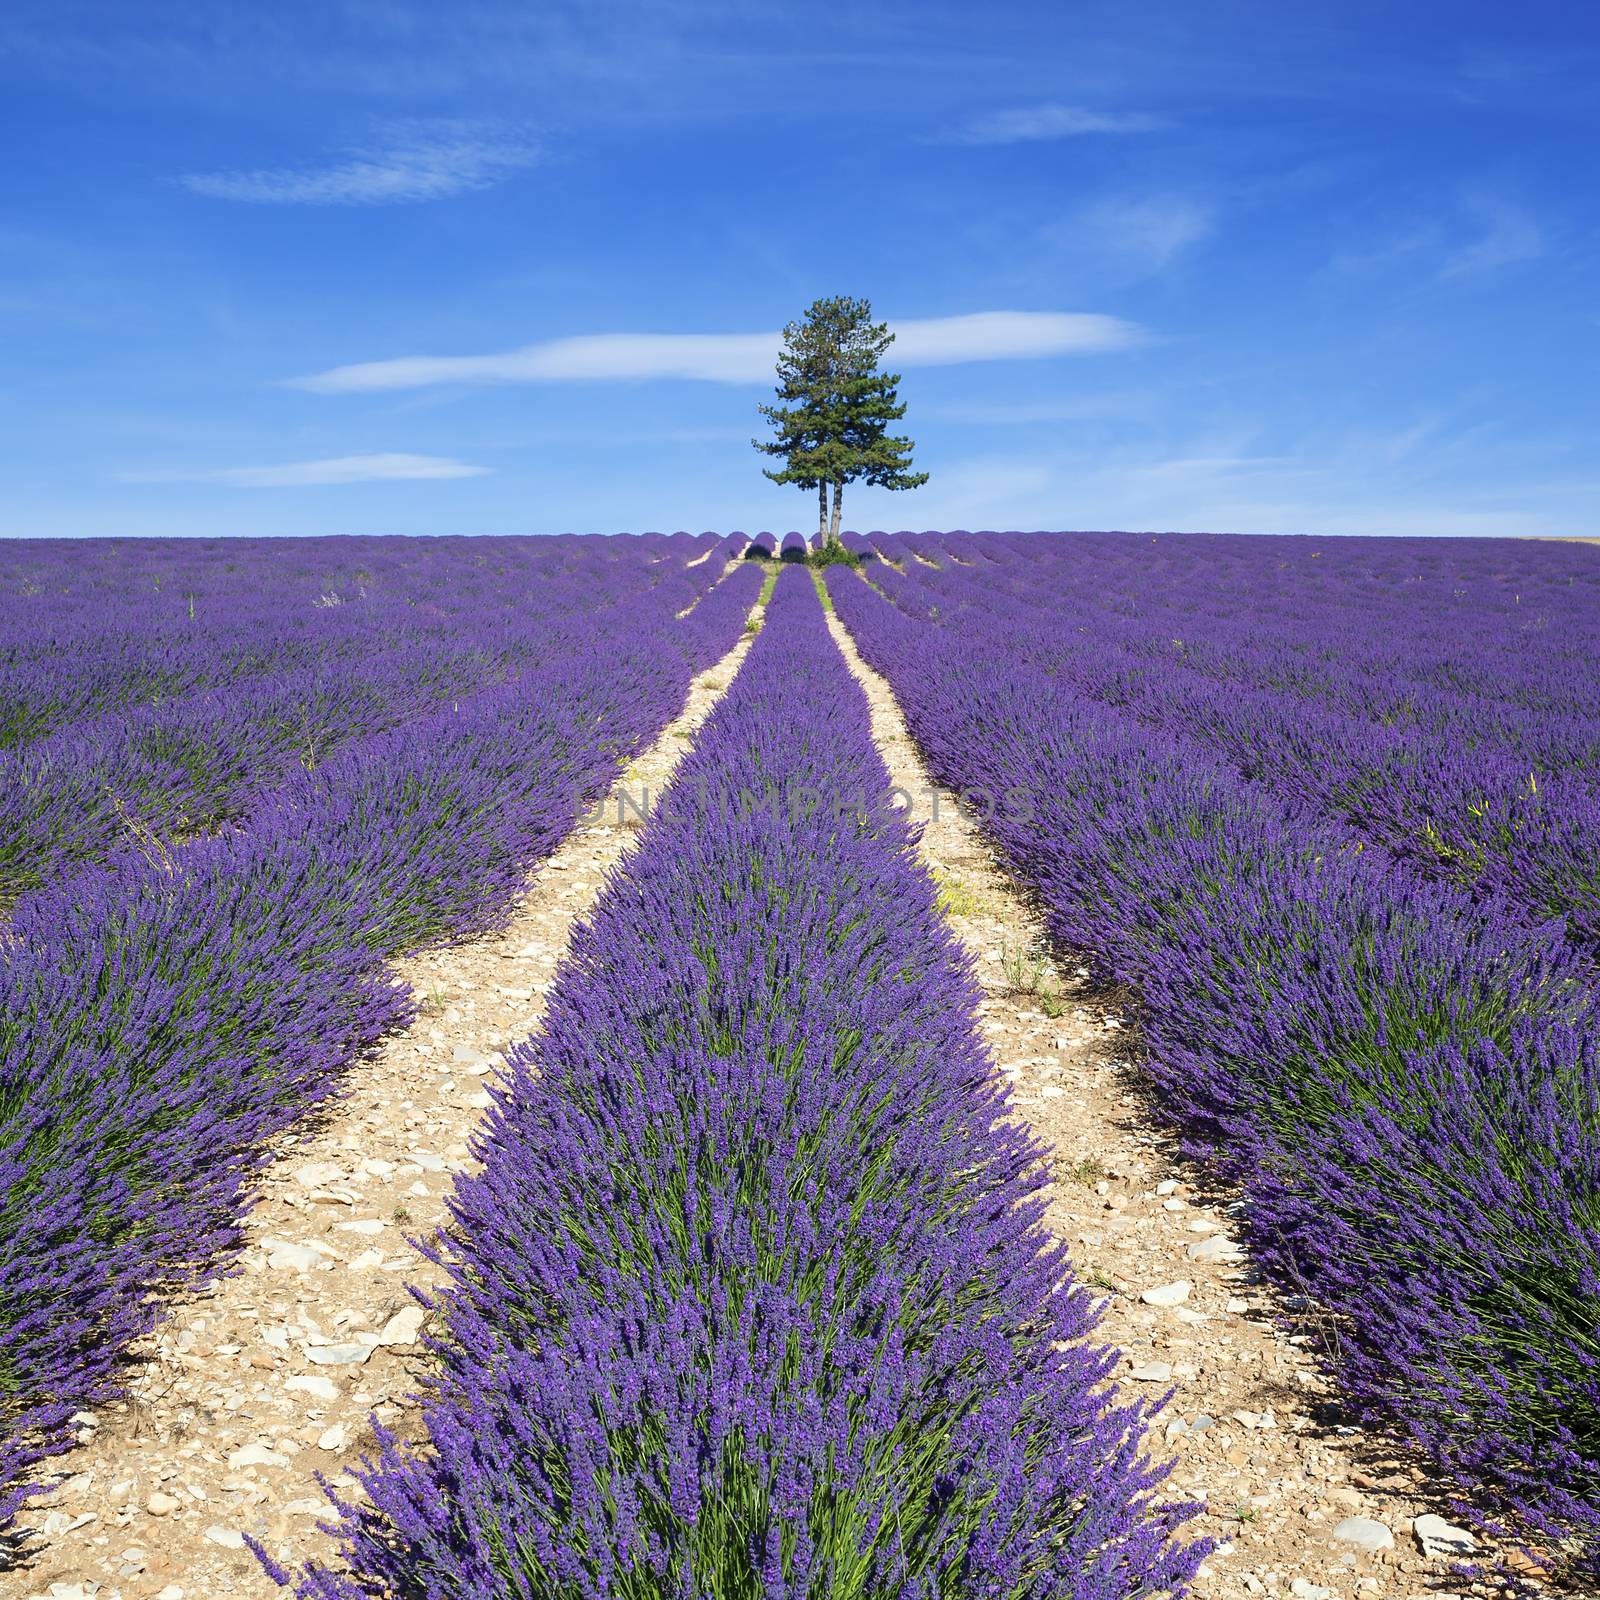 View of Lavender field with tree and blue sky by vwalakte